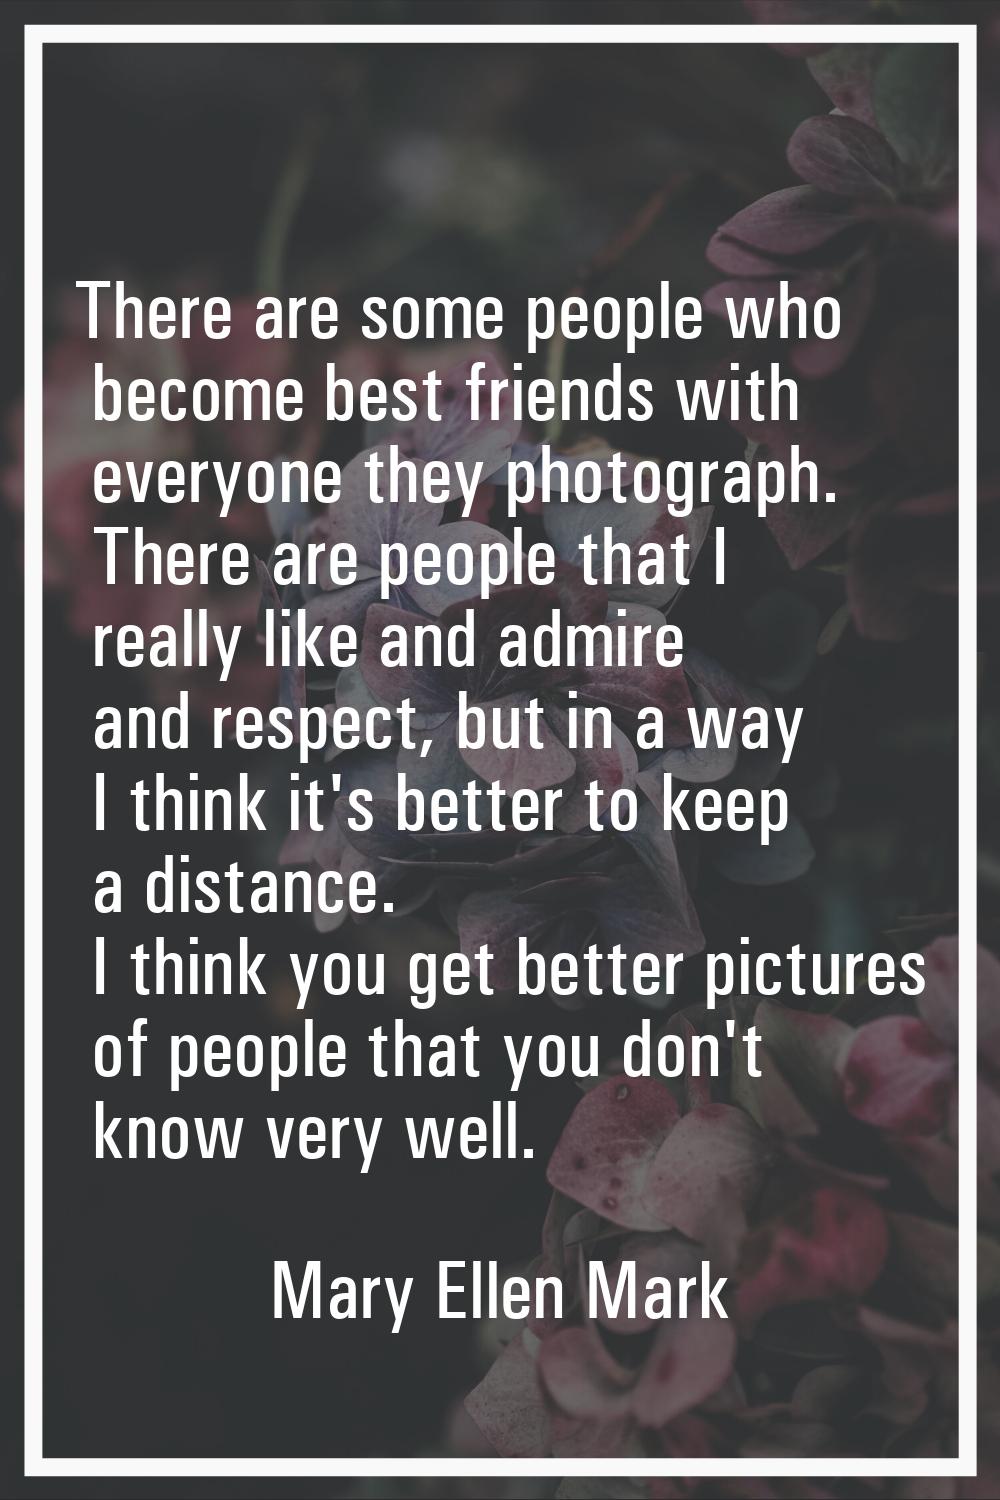 There are some people who become best friends with everyone they photograph. There are people that 